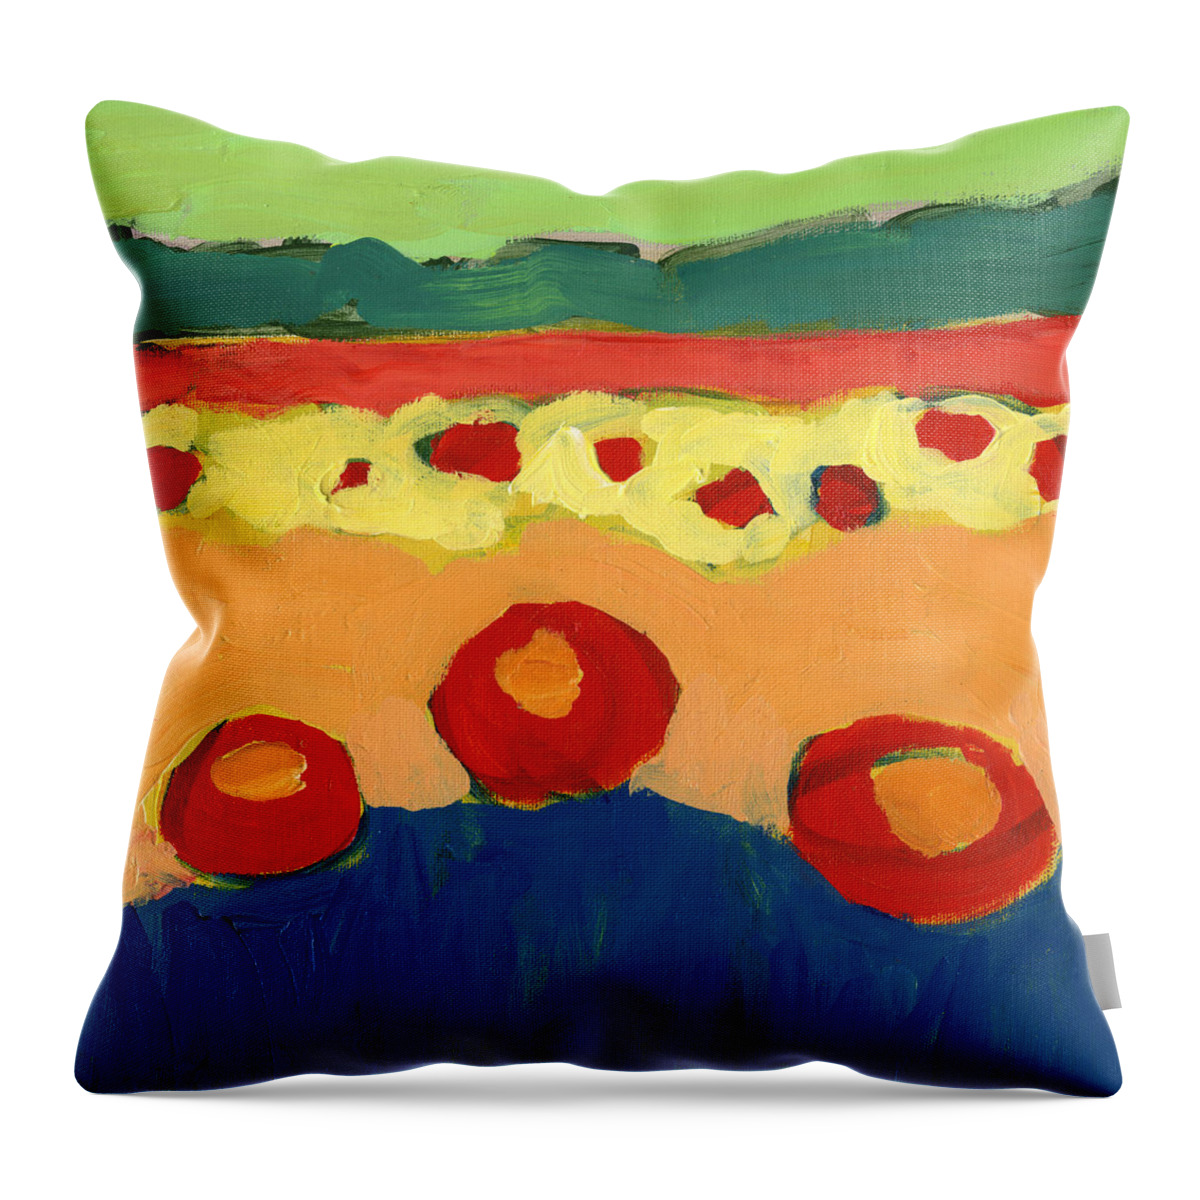 Abstract Throw Pillow featuring the painting Painted Valley No 2 by Jennifer Lommers